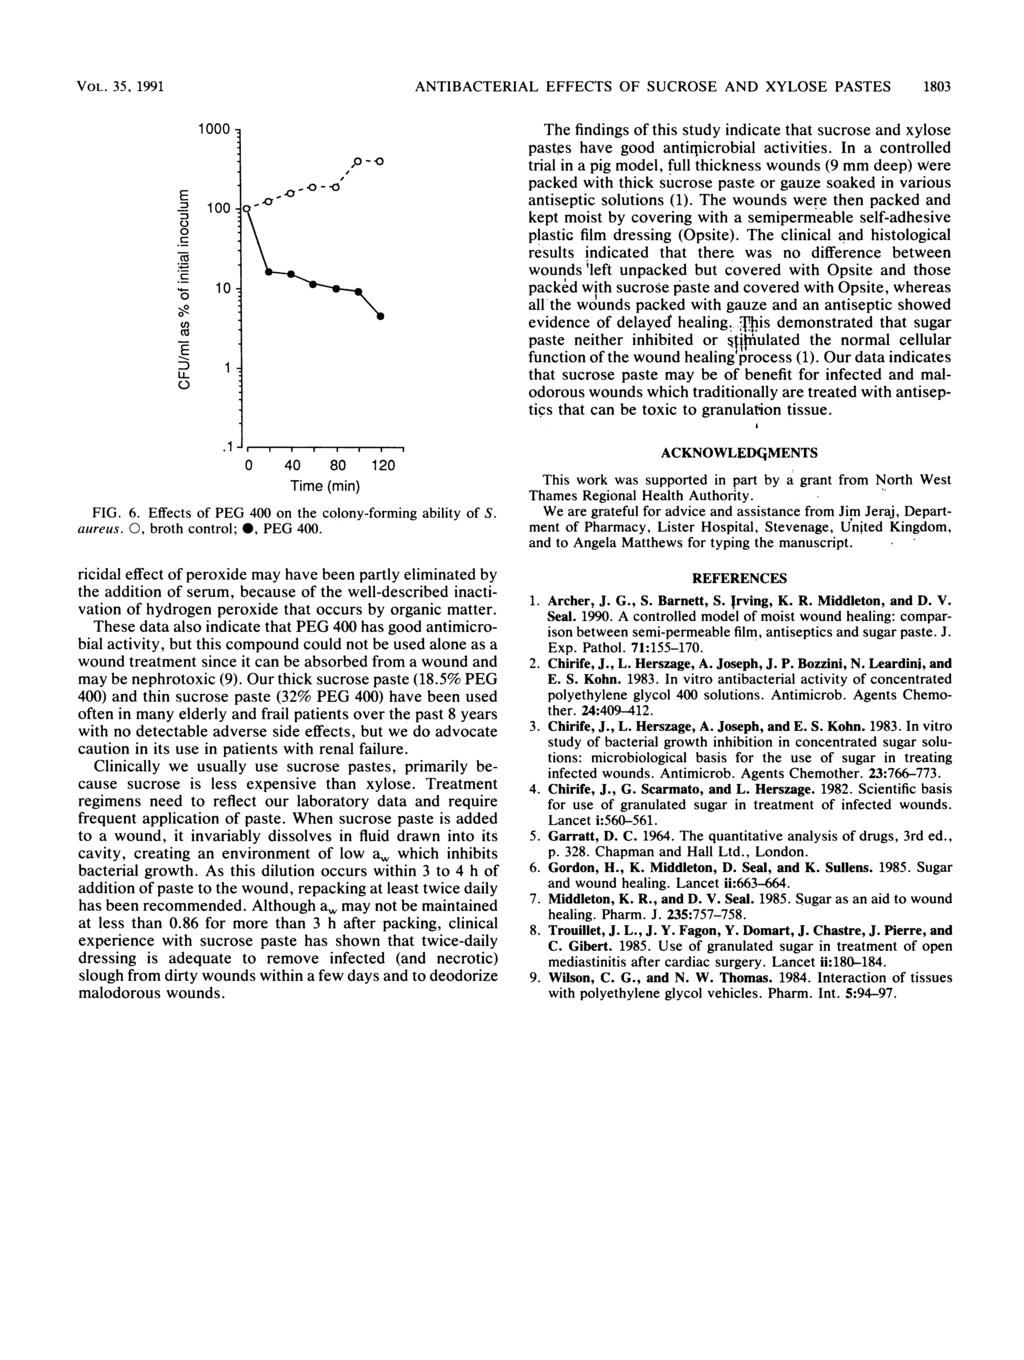 VOL. 35? 1991 ANTIBACTRIAL FFCTS OF SUCROS AND XYLOS PASTS 183 C. -Fz C) - - CZ 1 1 1-1 - ~ ~, - The findings of this study indicate that sucrose and xylose pastes have good antimricrobial activities.